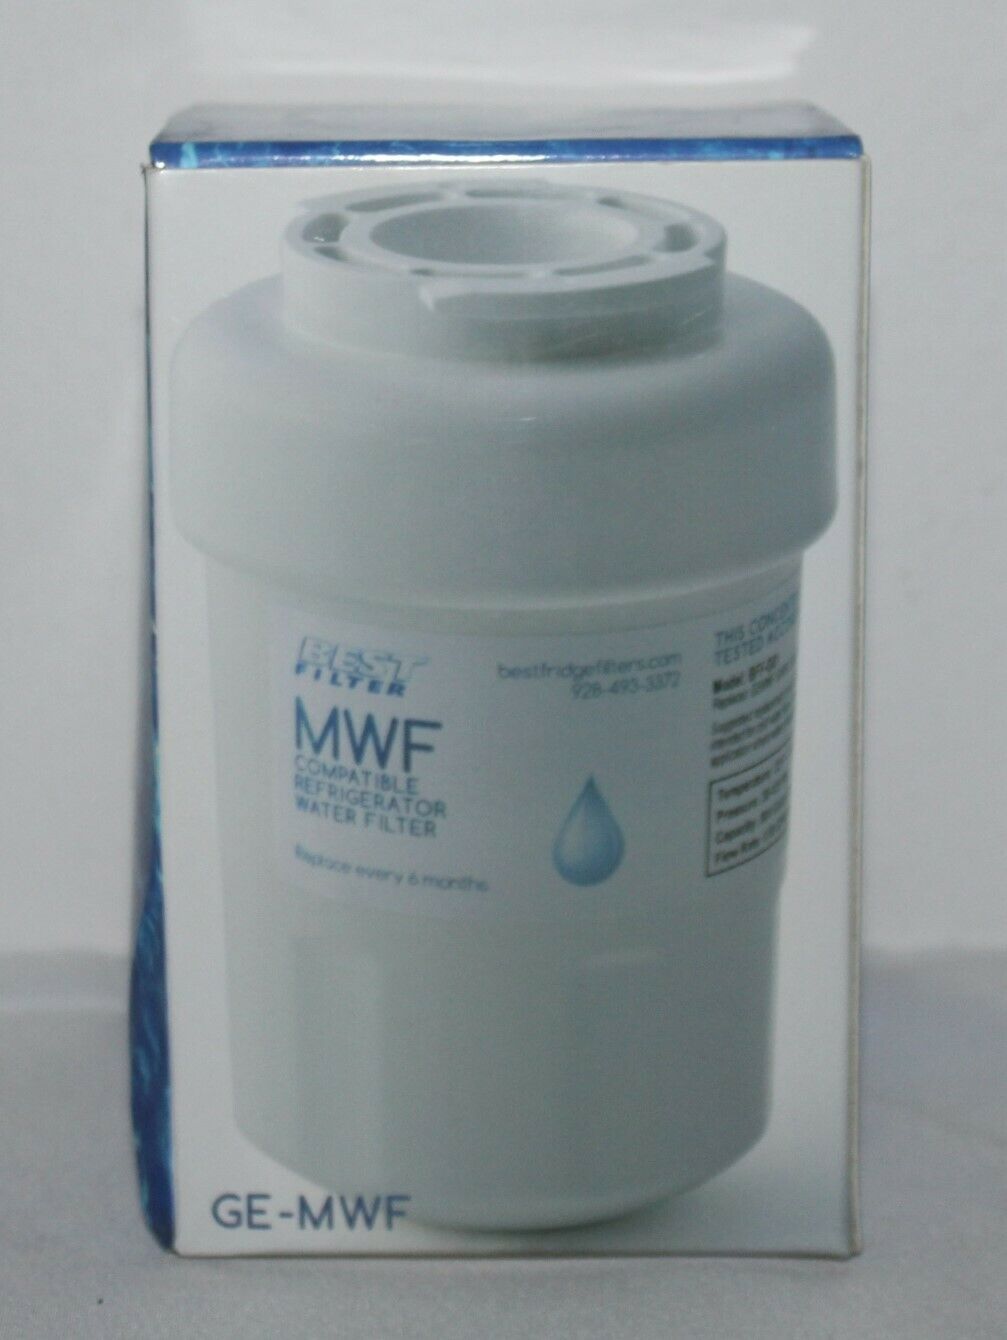 Primary image for New Genuine GE- MWF  BEST  Smartwater Refrigerator Water Filter Sealed